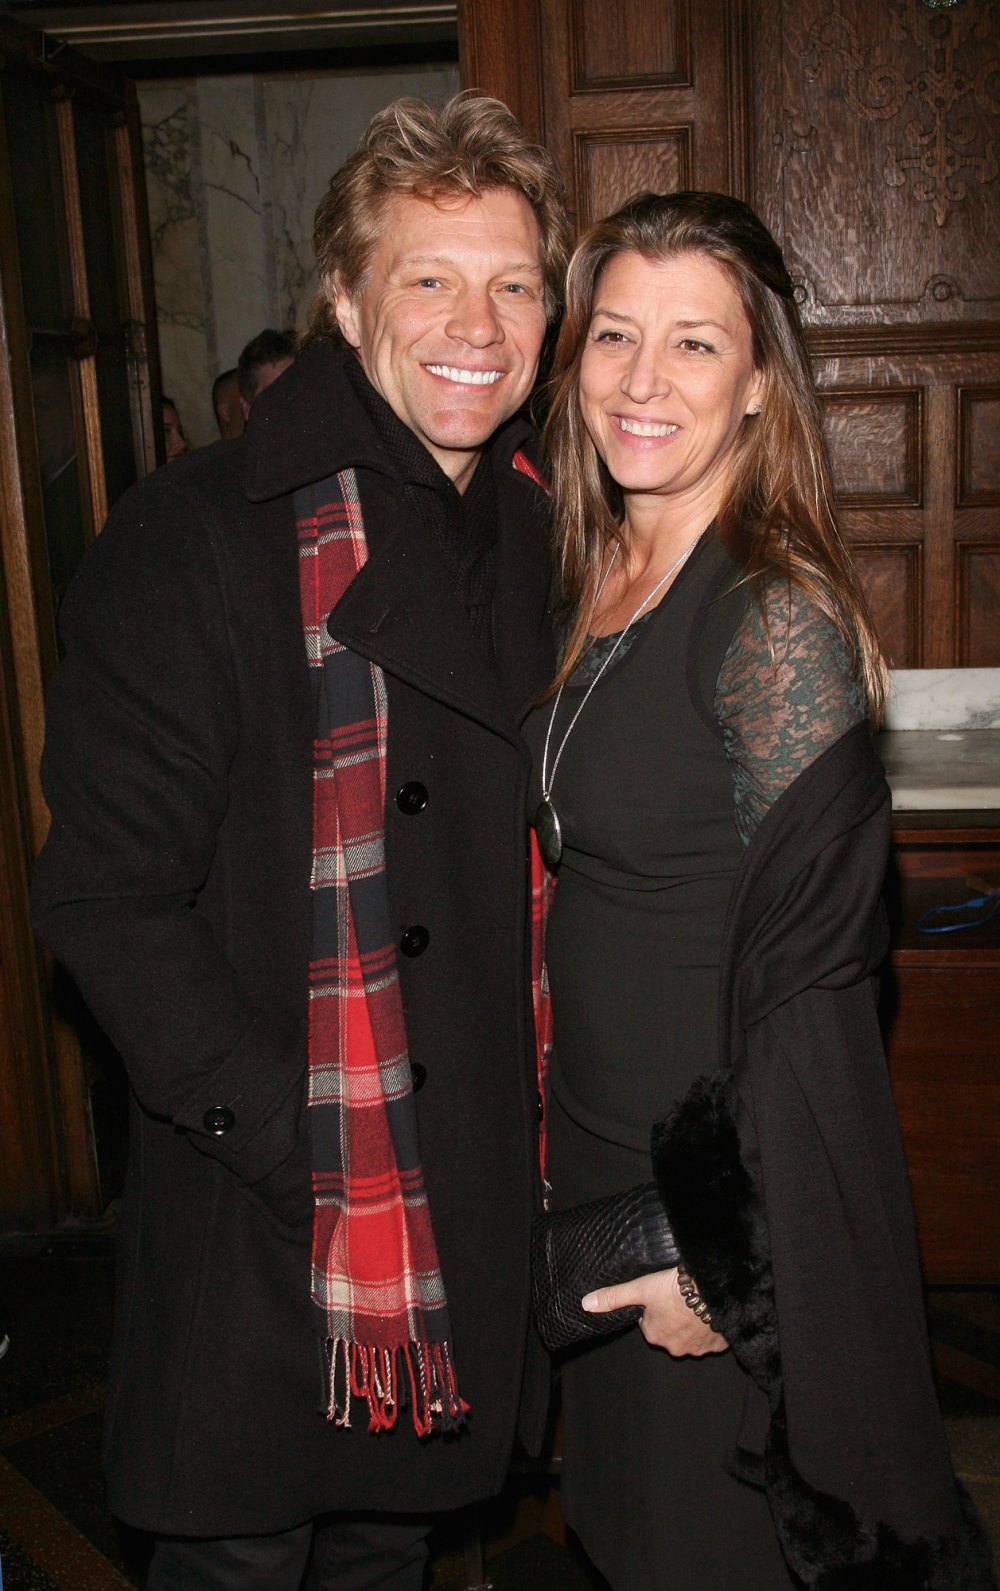 Jon Bon Jovi Honest Quotes About His Marriage to Dorothea Hurley